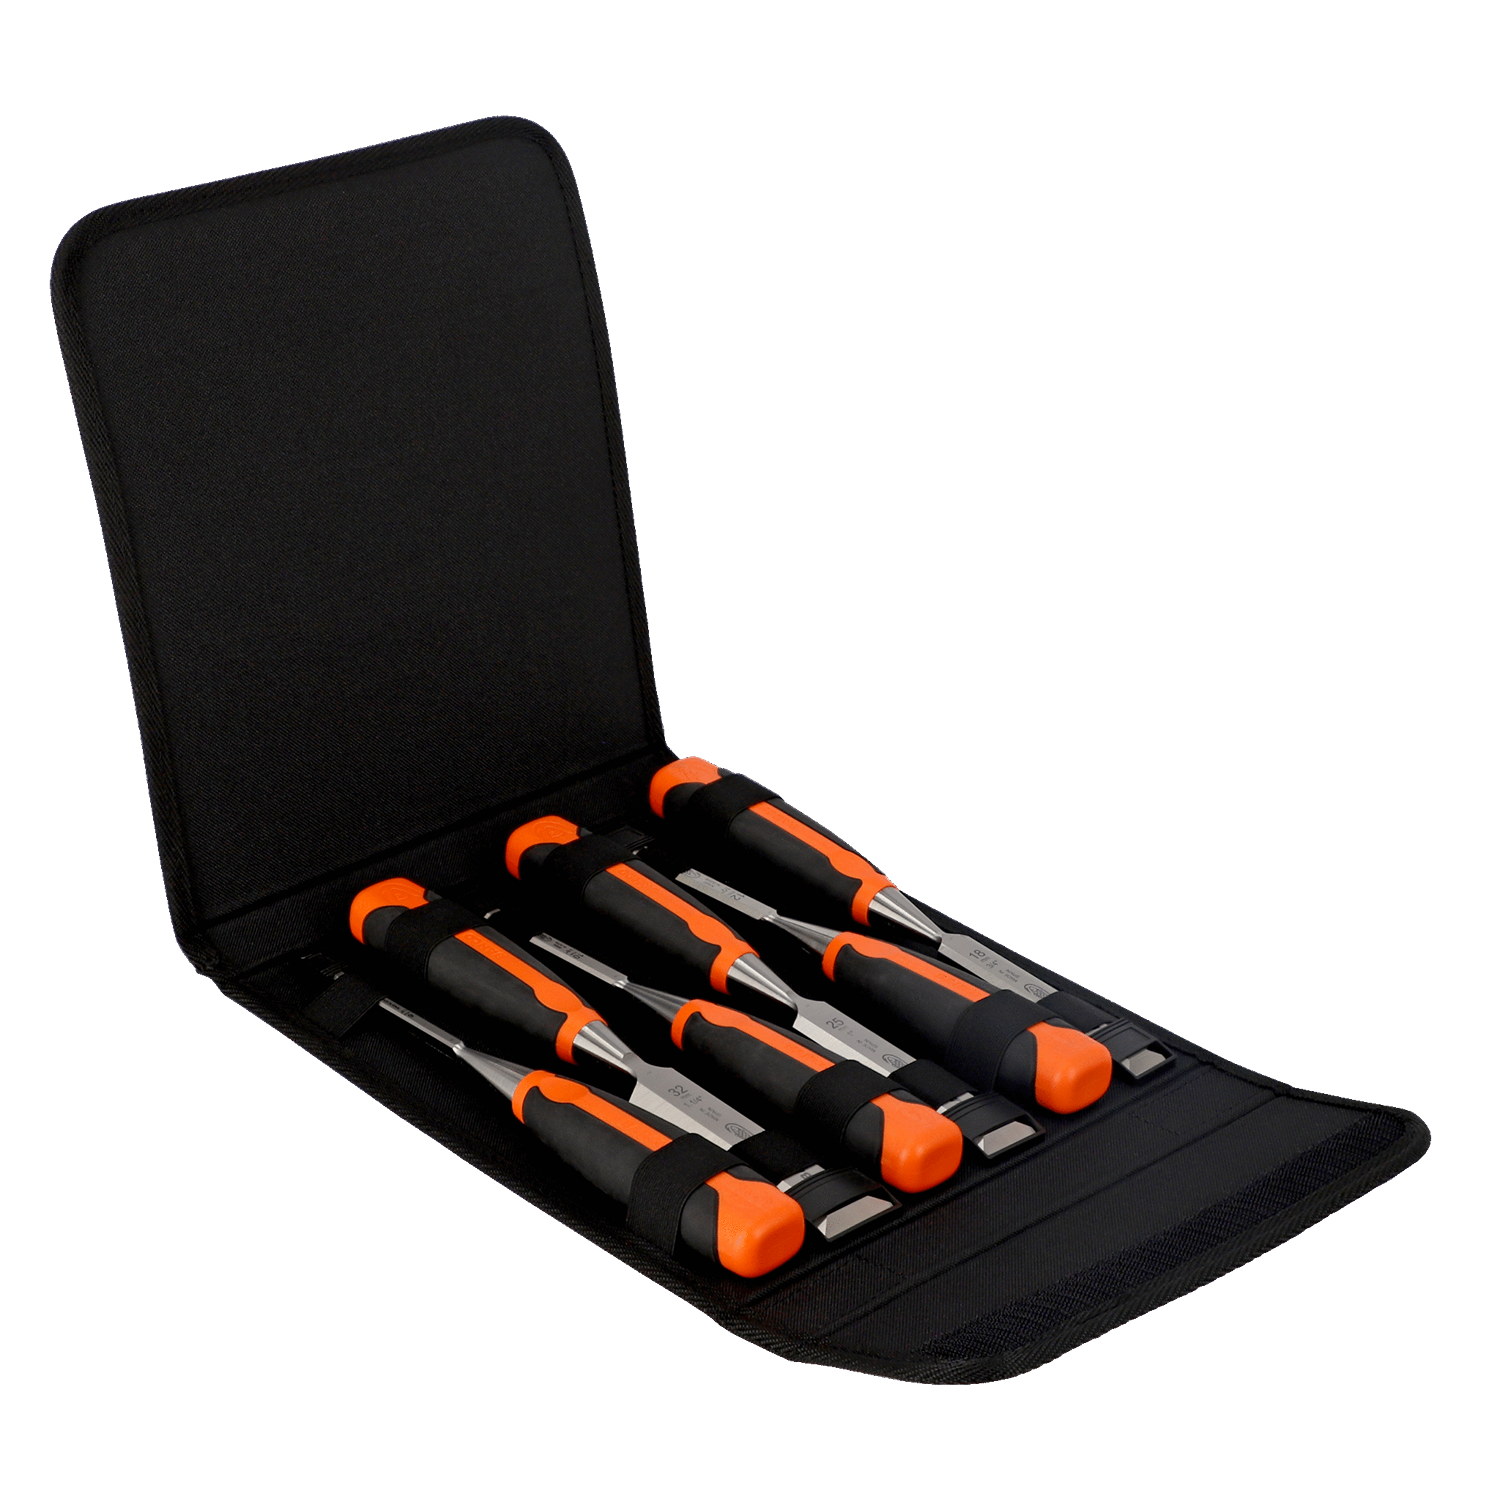 BAHCO 424P-S6-PP Chisel Set with Rubberised Handle - 6 Pcs - Premium Chisel Set from BAHCO - Shop now at Yew Aik.